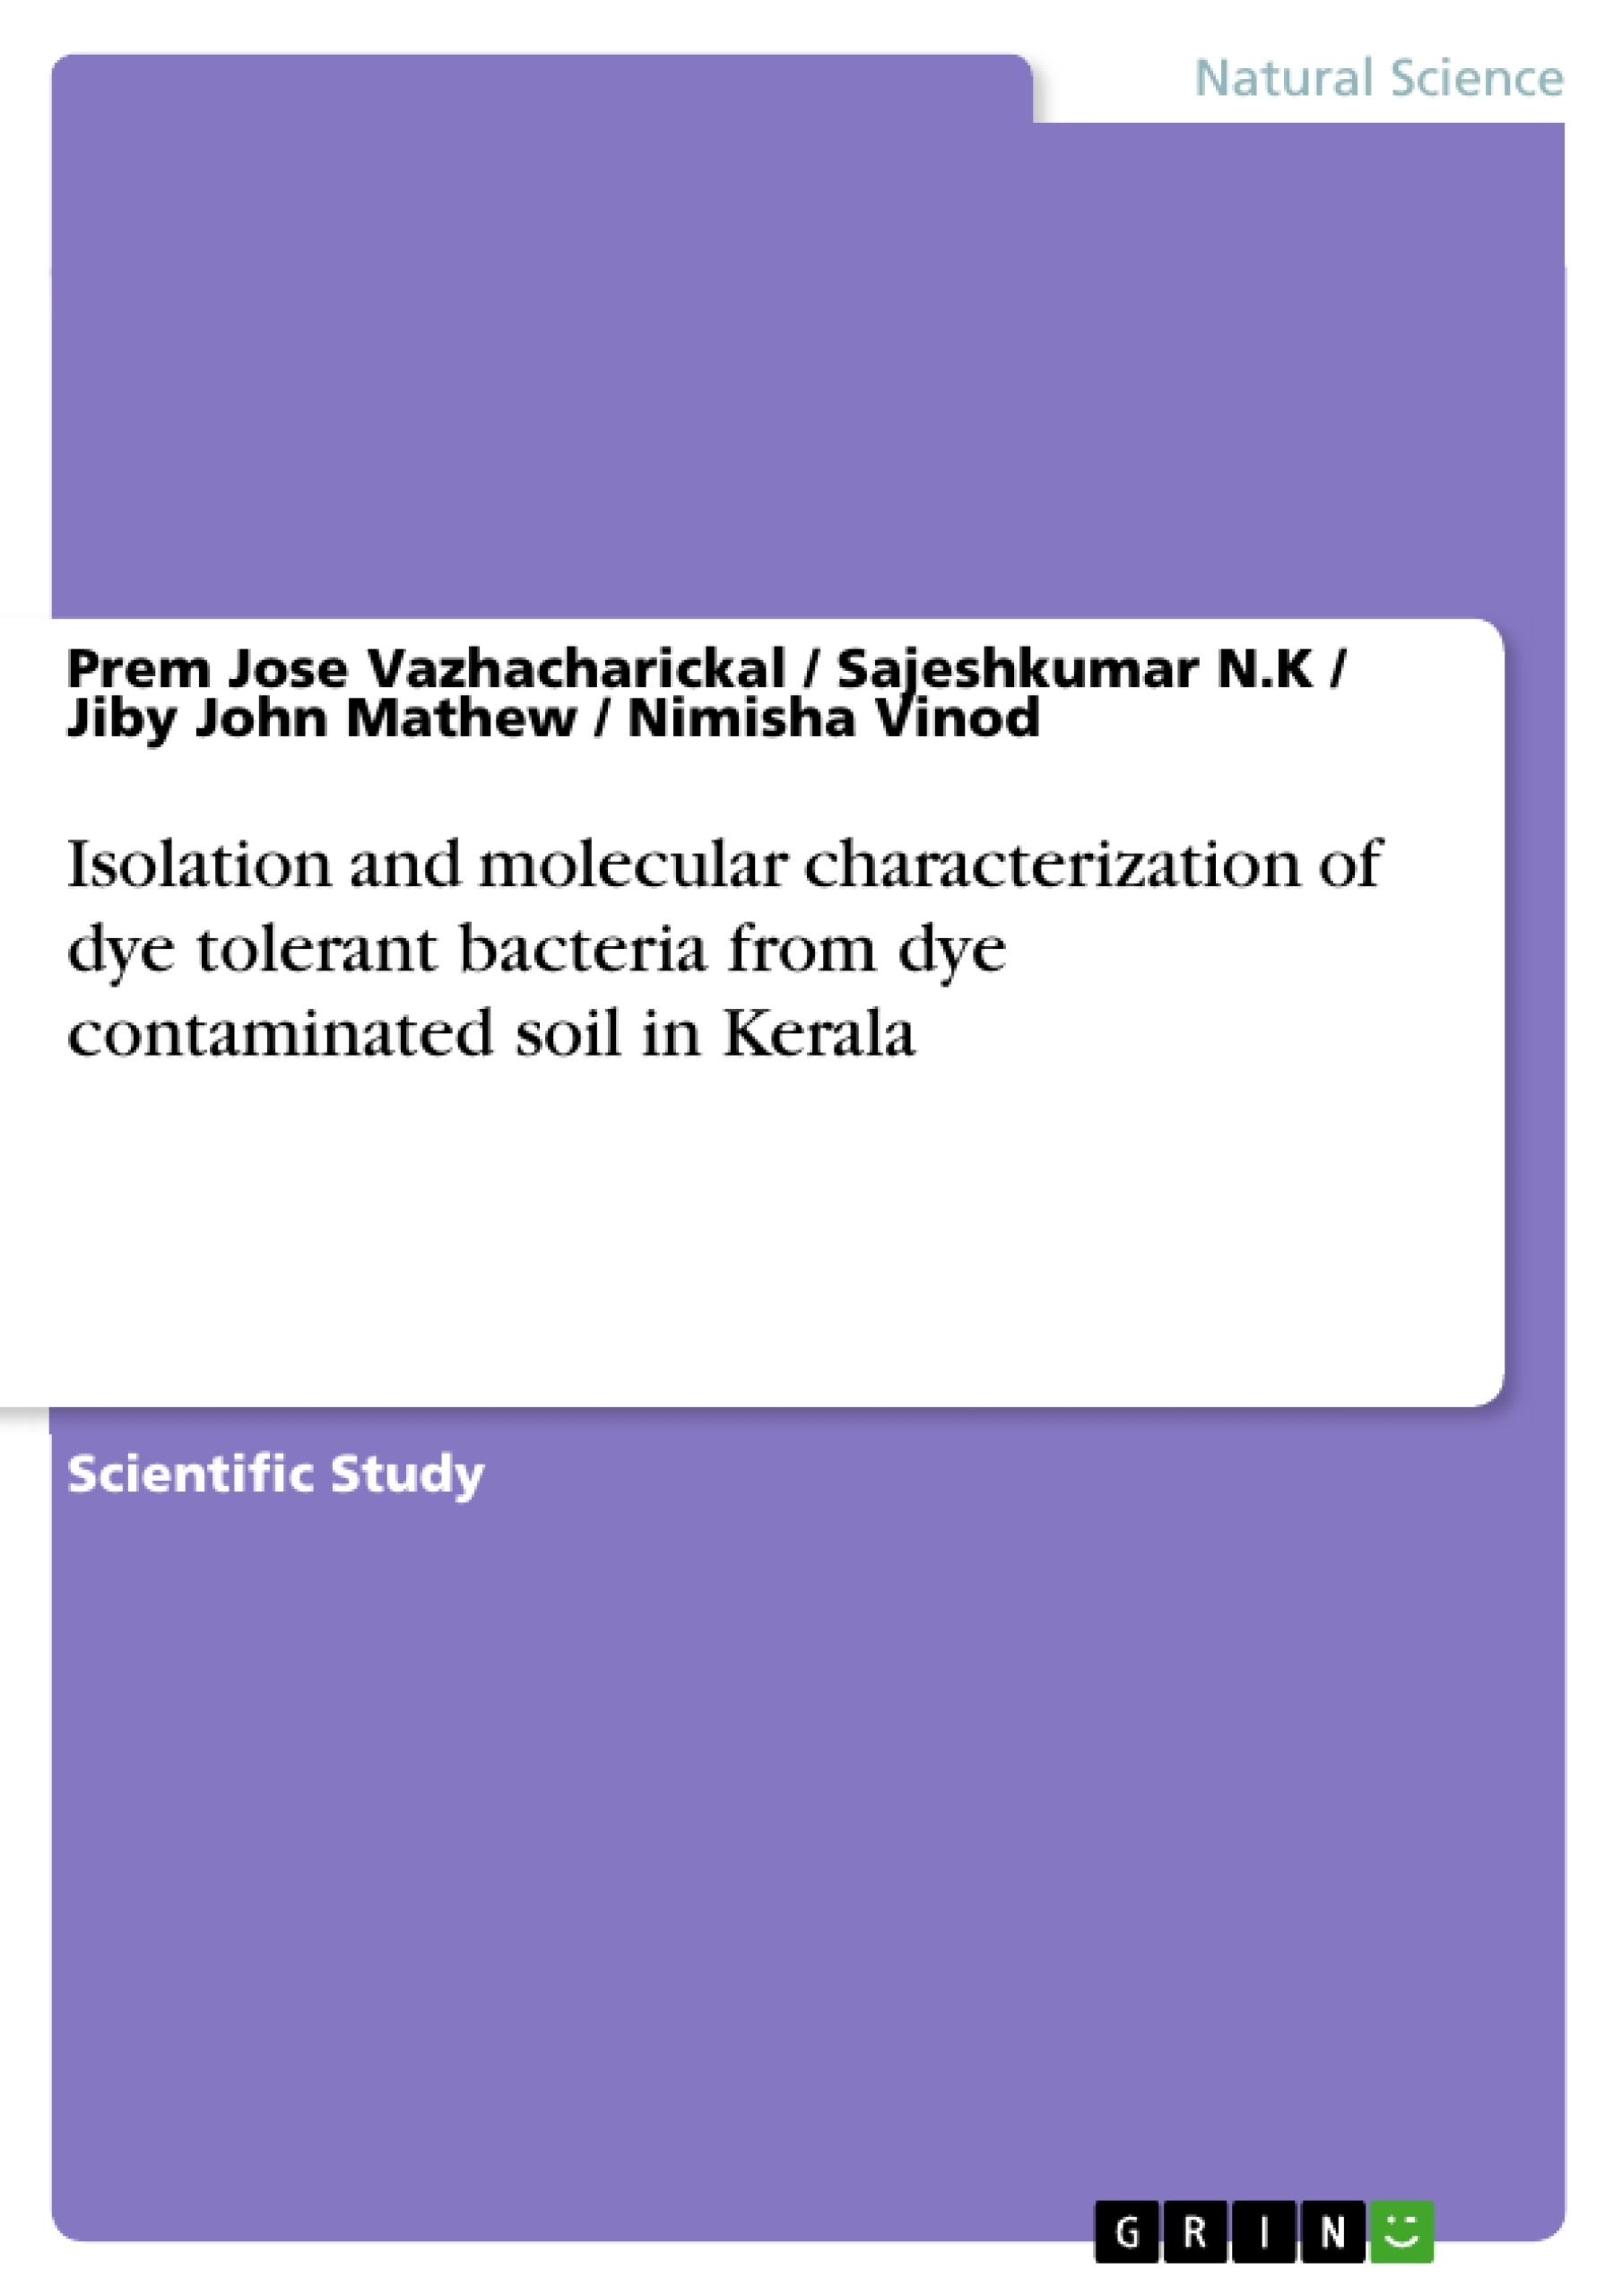 Título: Isolation and molecular characterization of dye tolerant bacteria from dye contaminated soil in Kerala